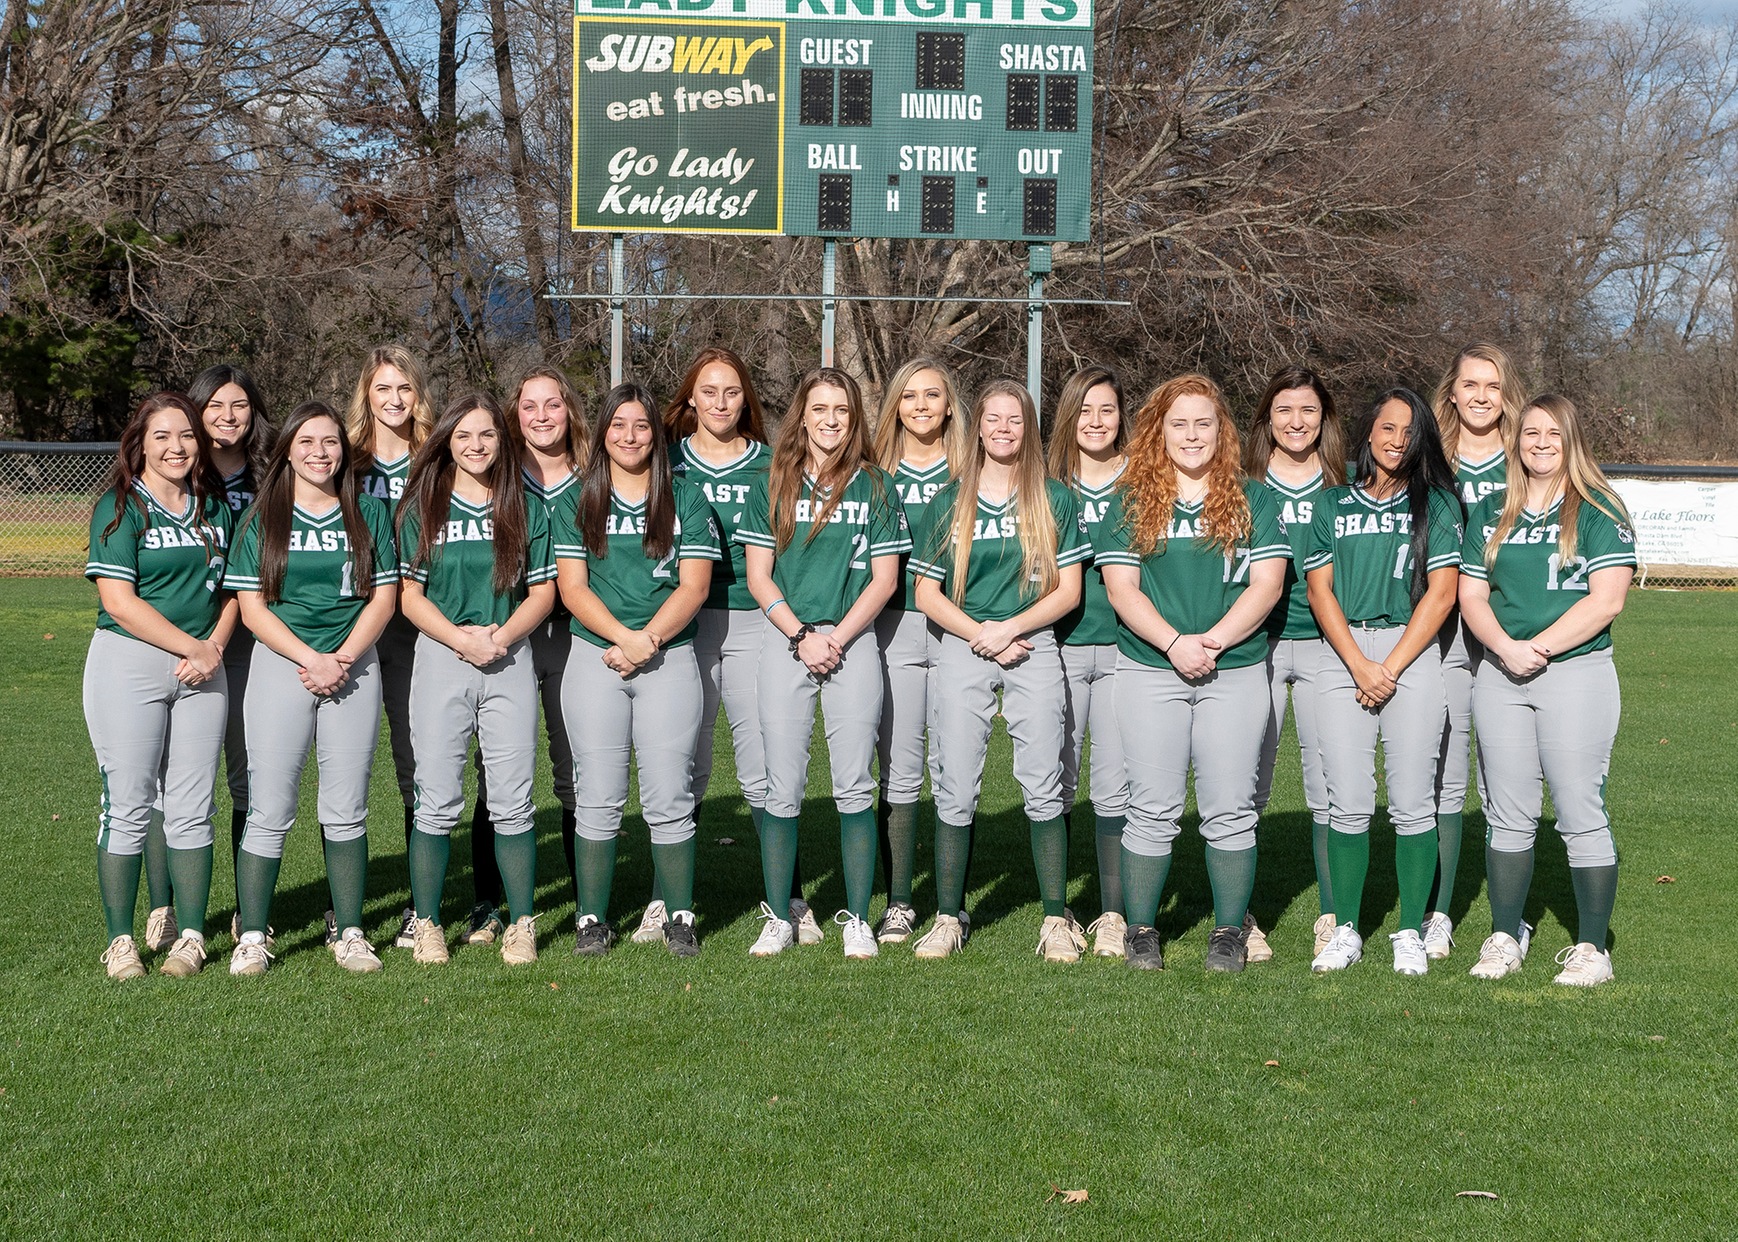 SHASTA COLLEGE SWEPT FOR FIRST TIME THIS SEASON